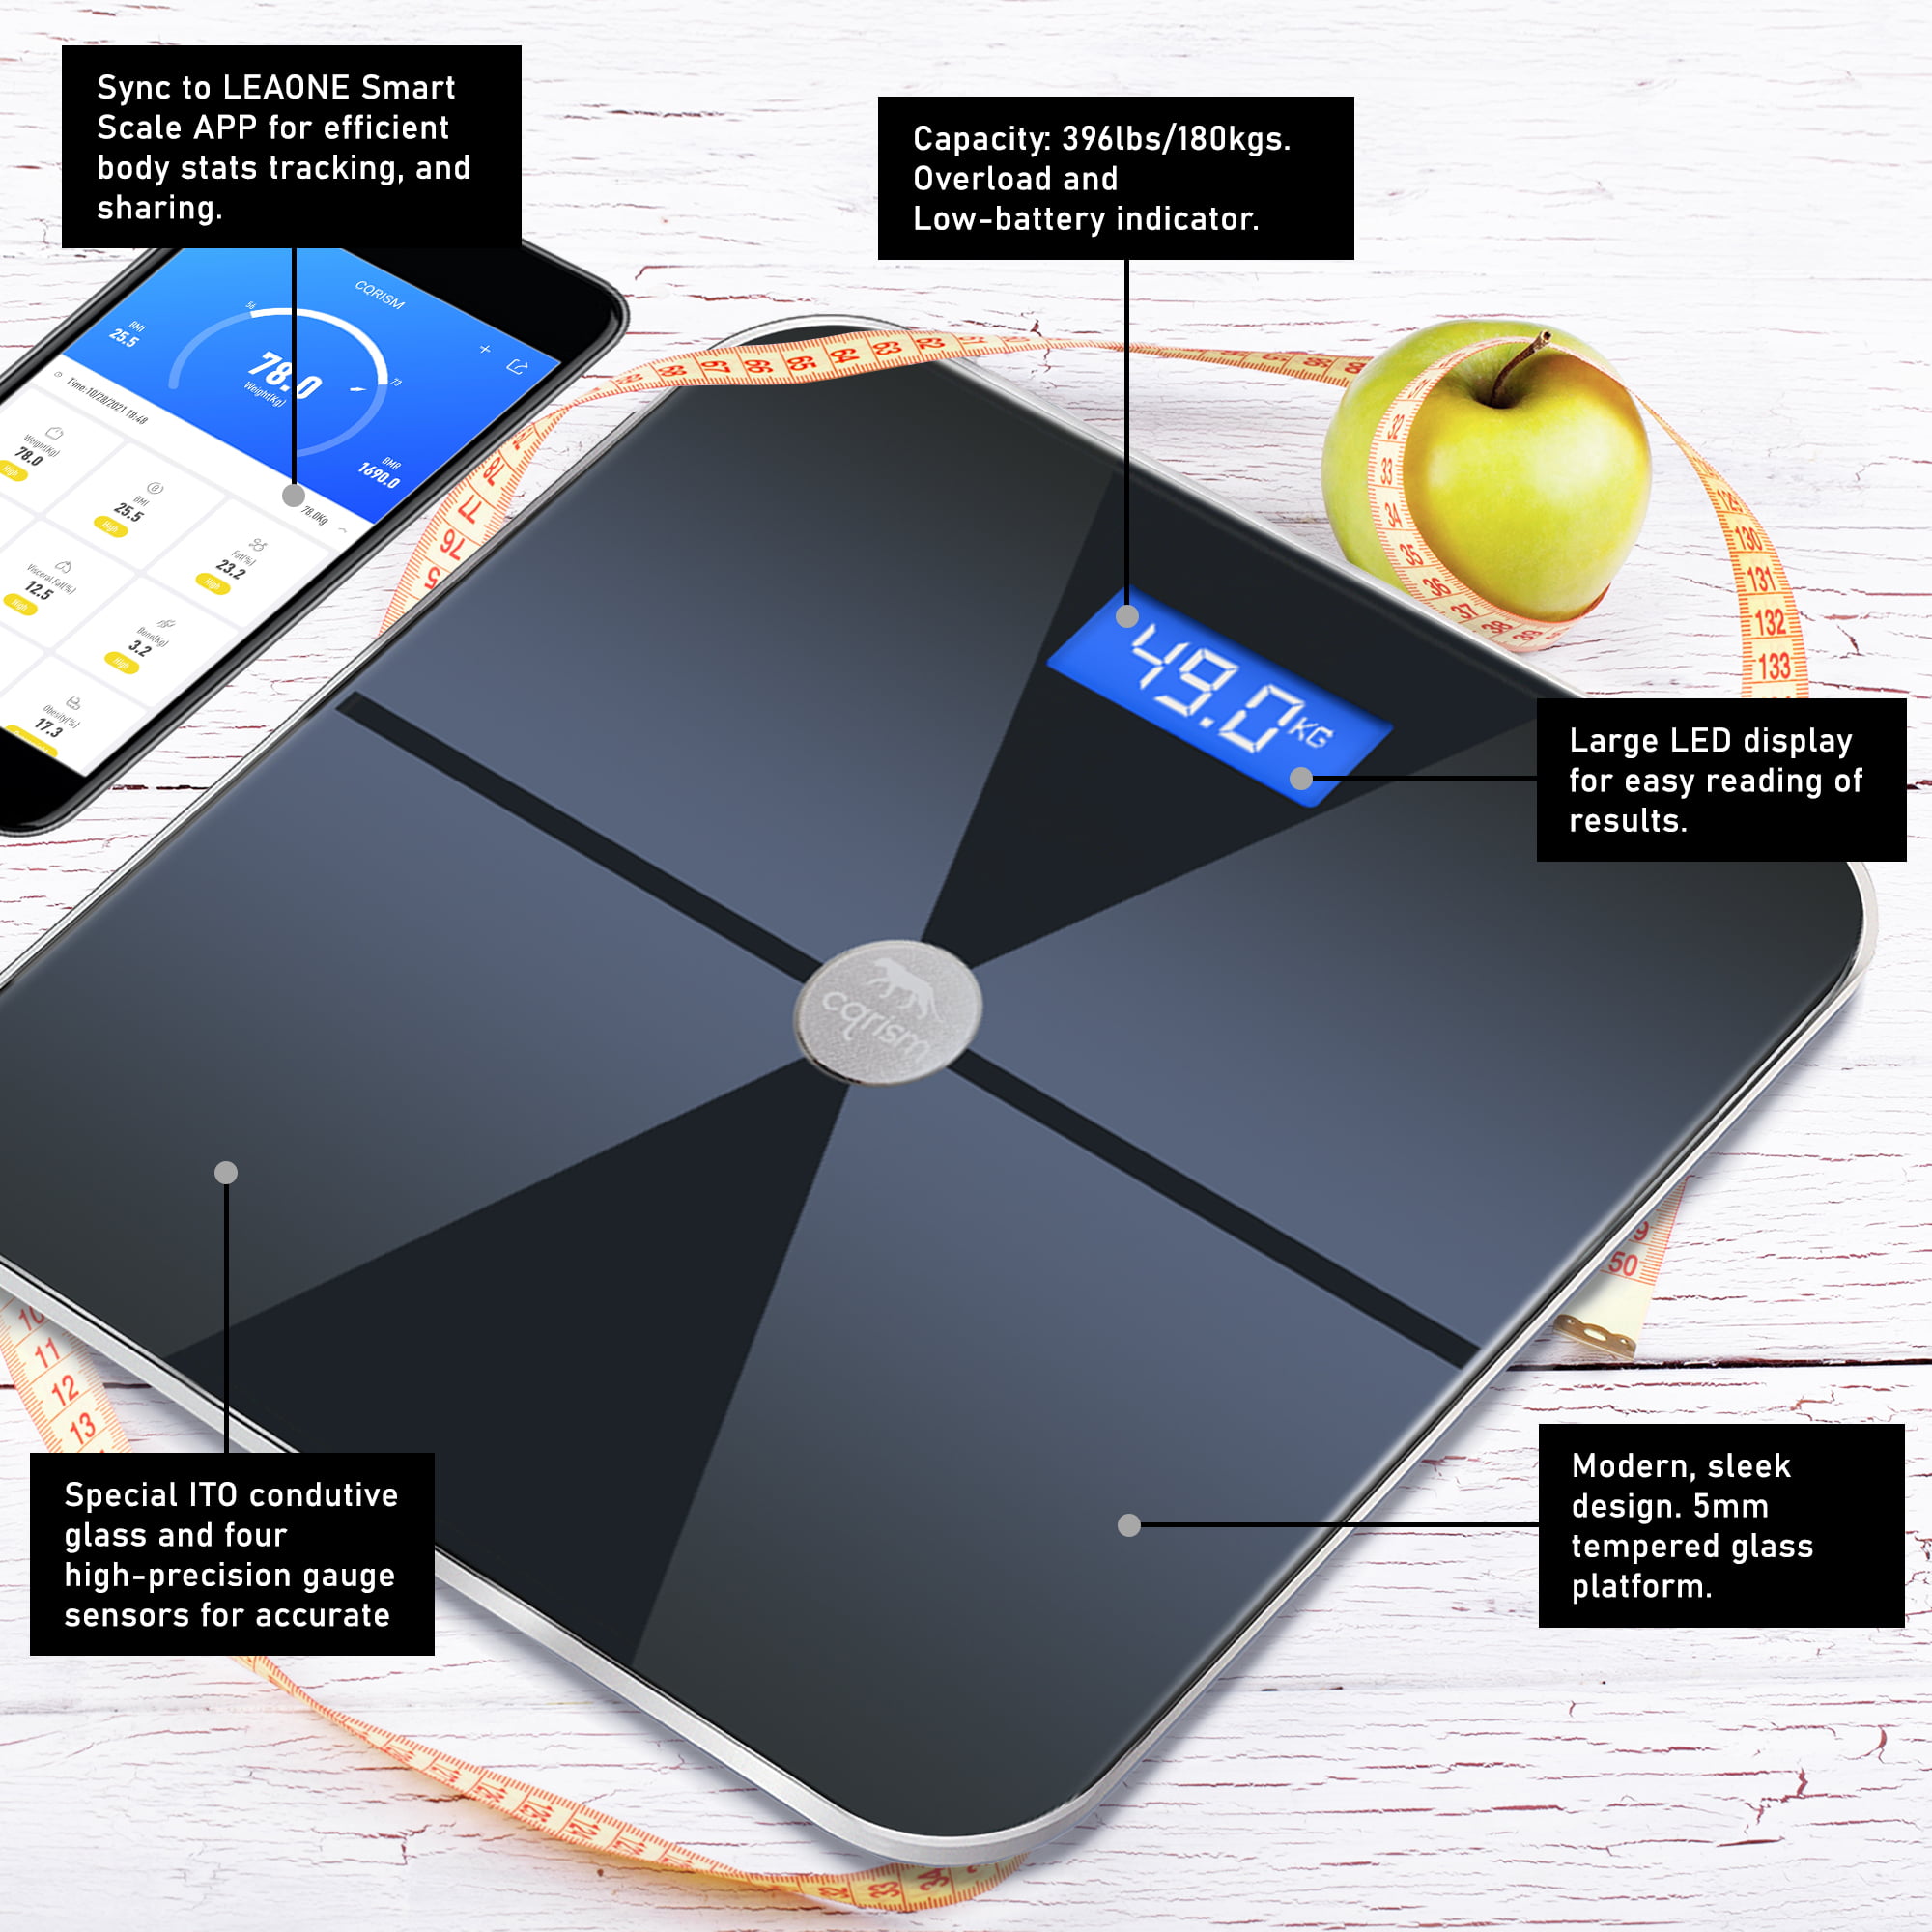 DEIK Smart Digital Body Fat Scale, Black Bluetooth Bathroom Scale, with iOS  and Android APP, 180kg/400lb High Precision Measurement, Detects 13 Data